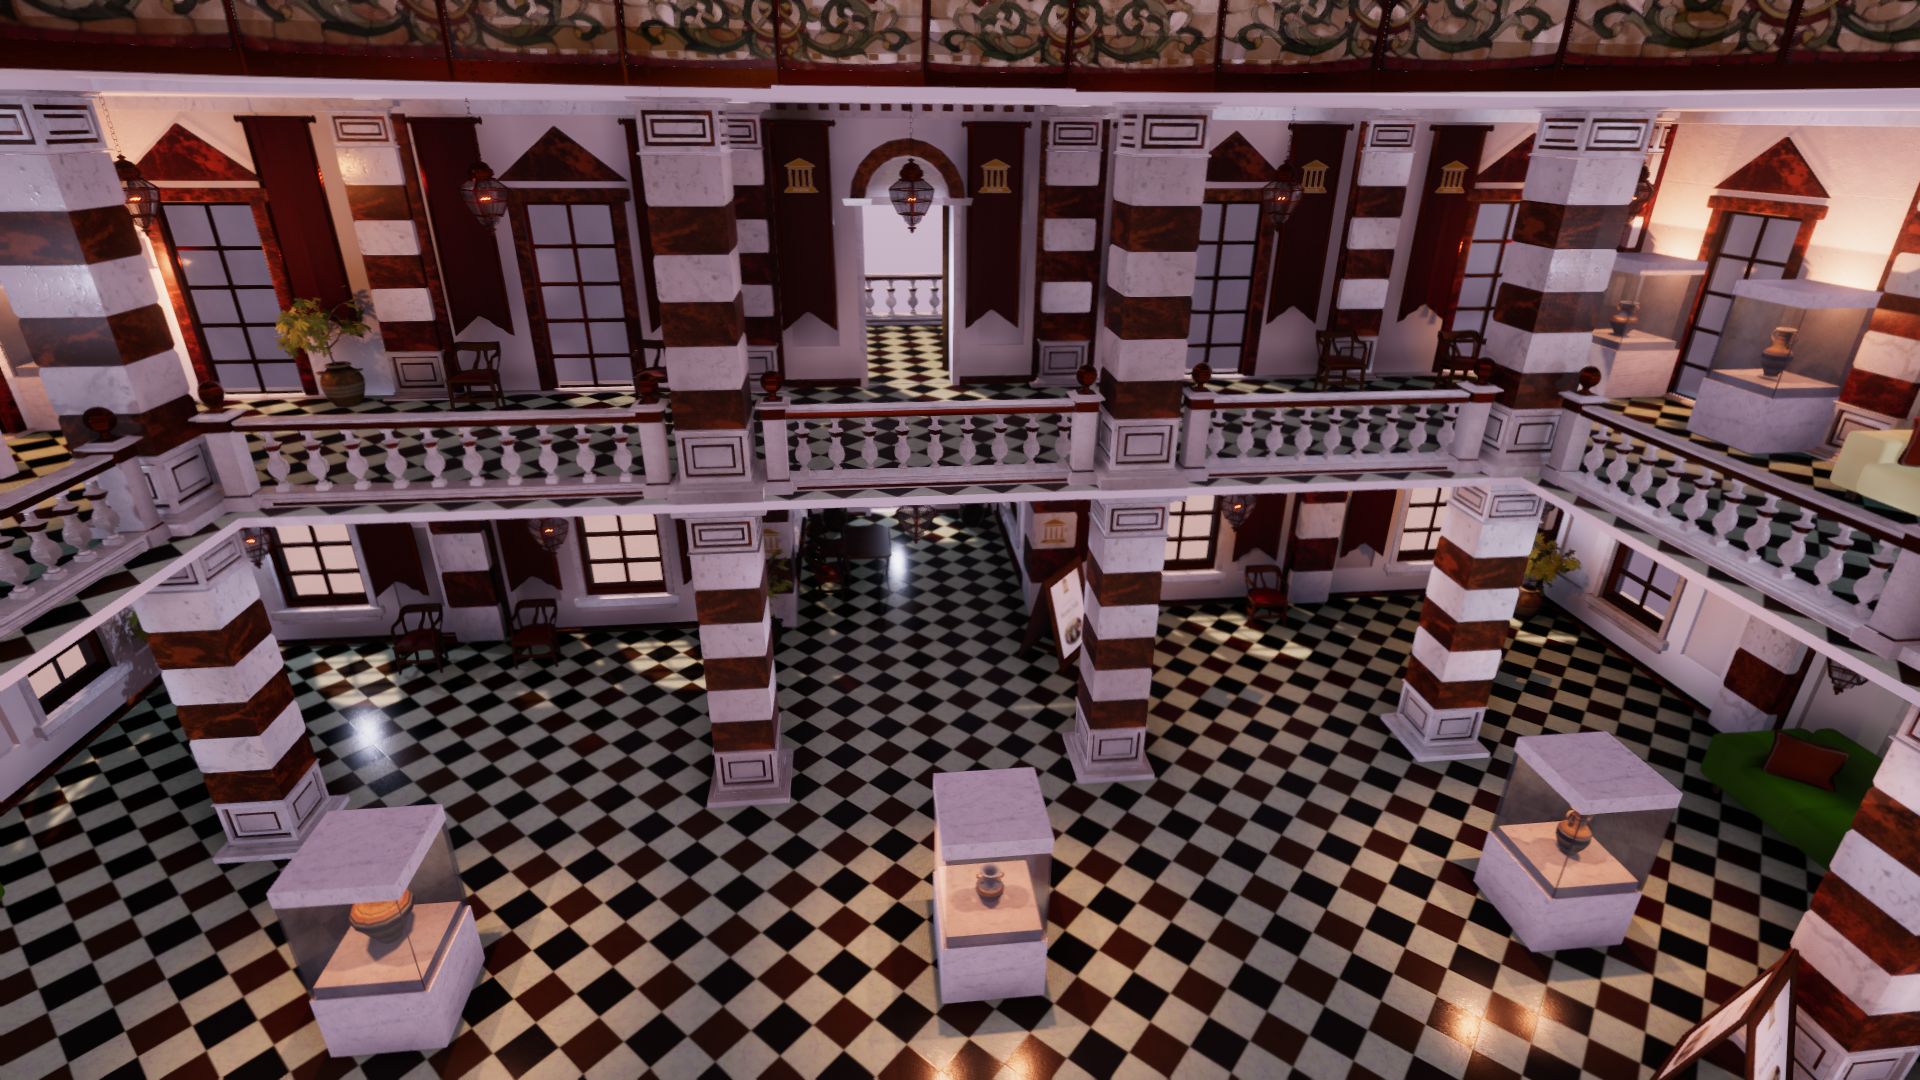 An image showing Museum asset pack, created with Unity Engine.